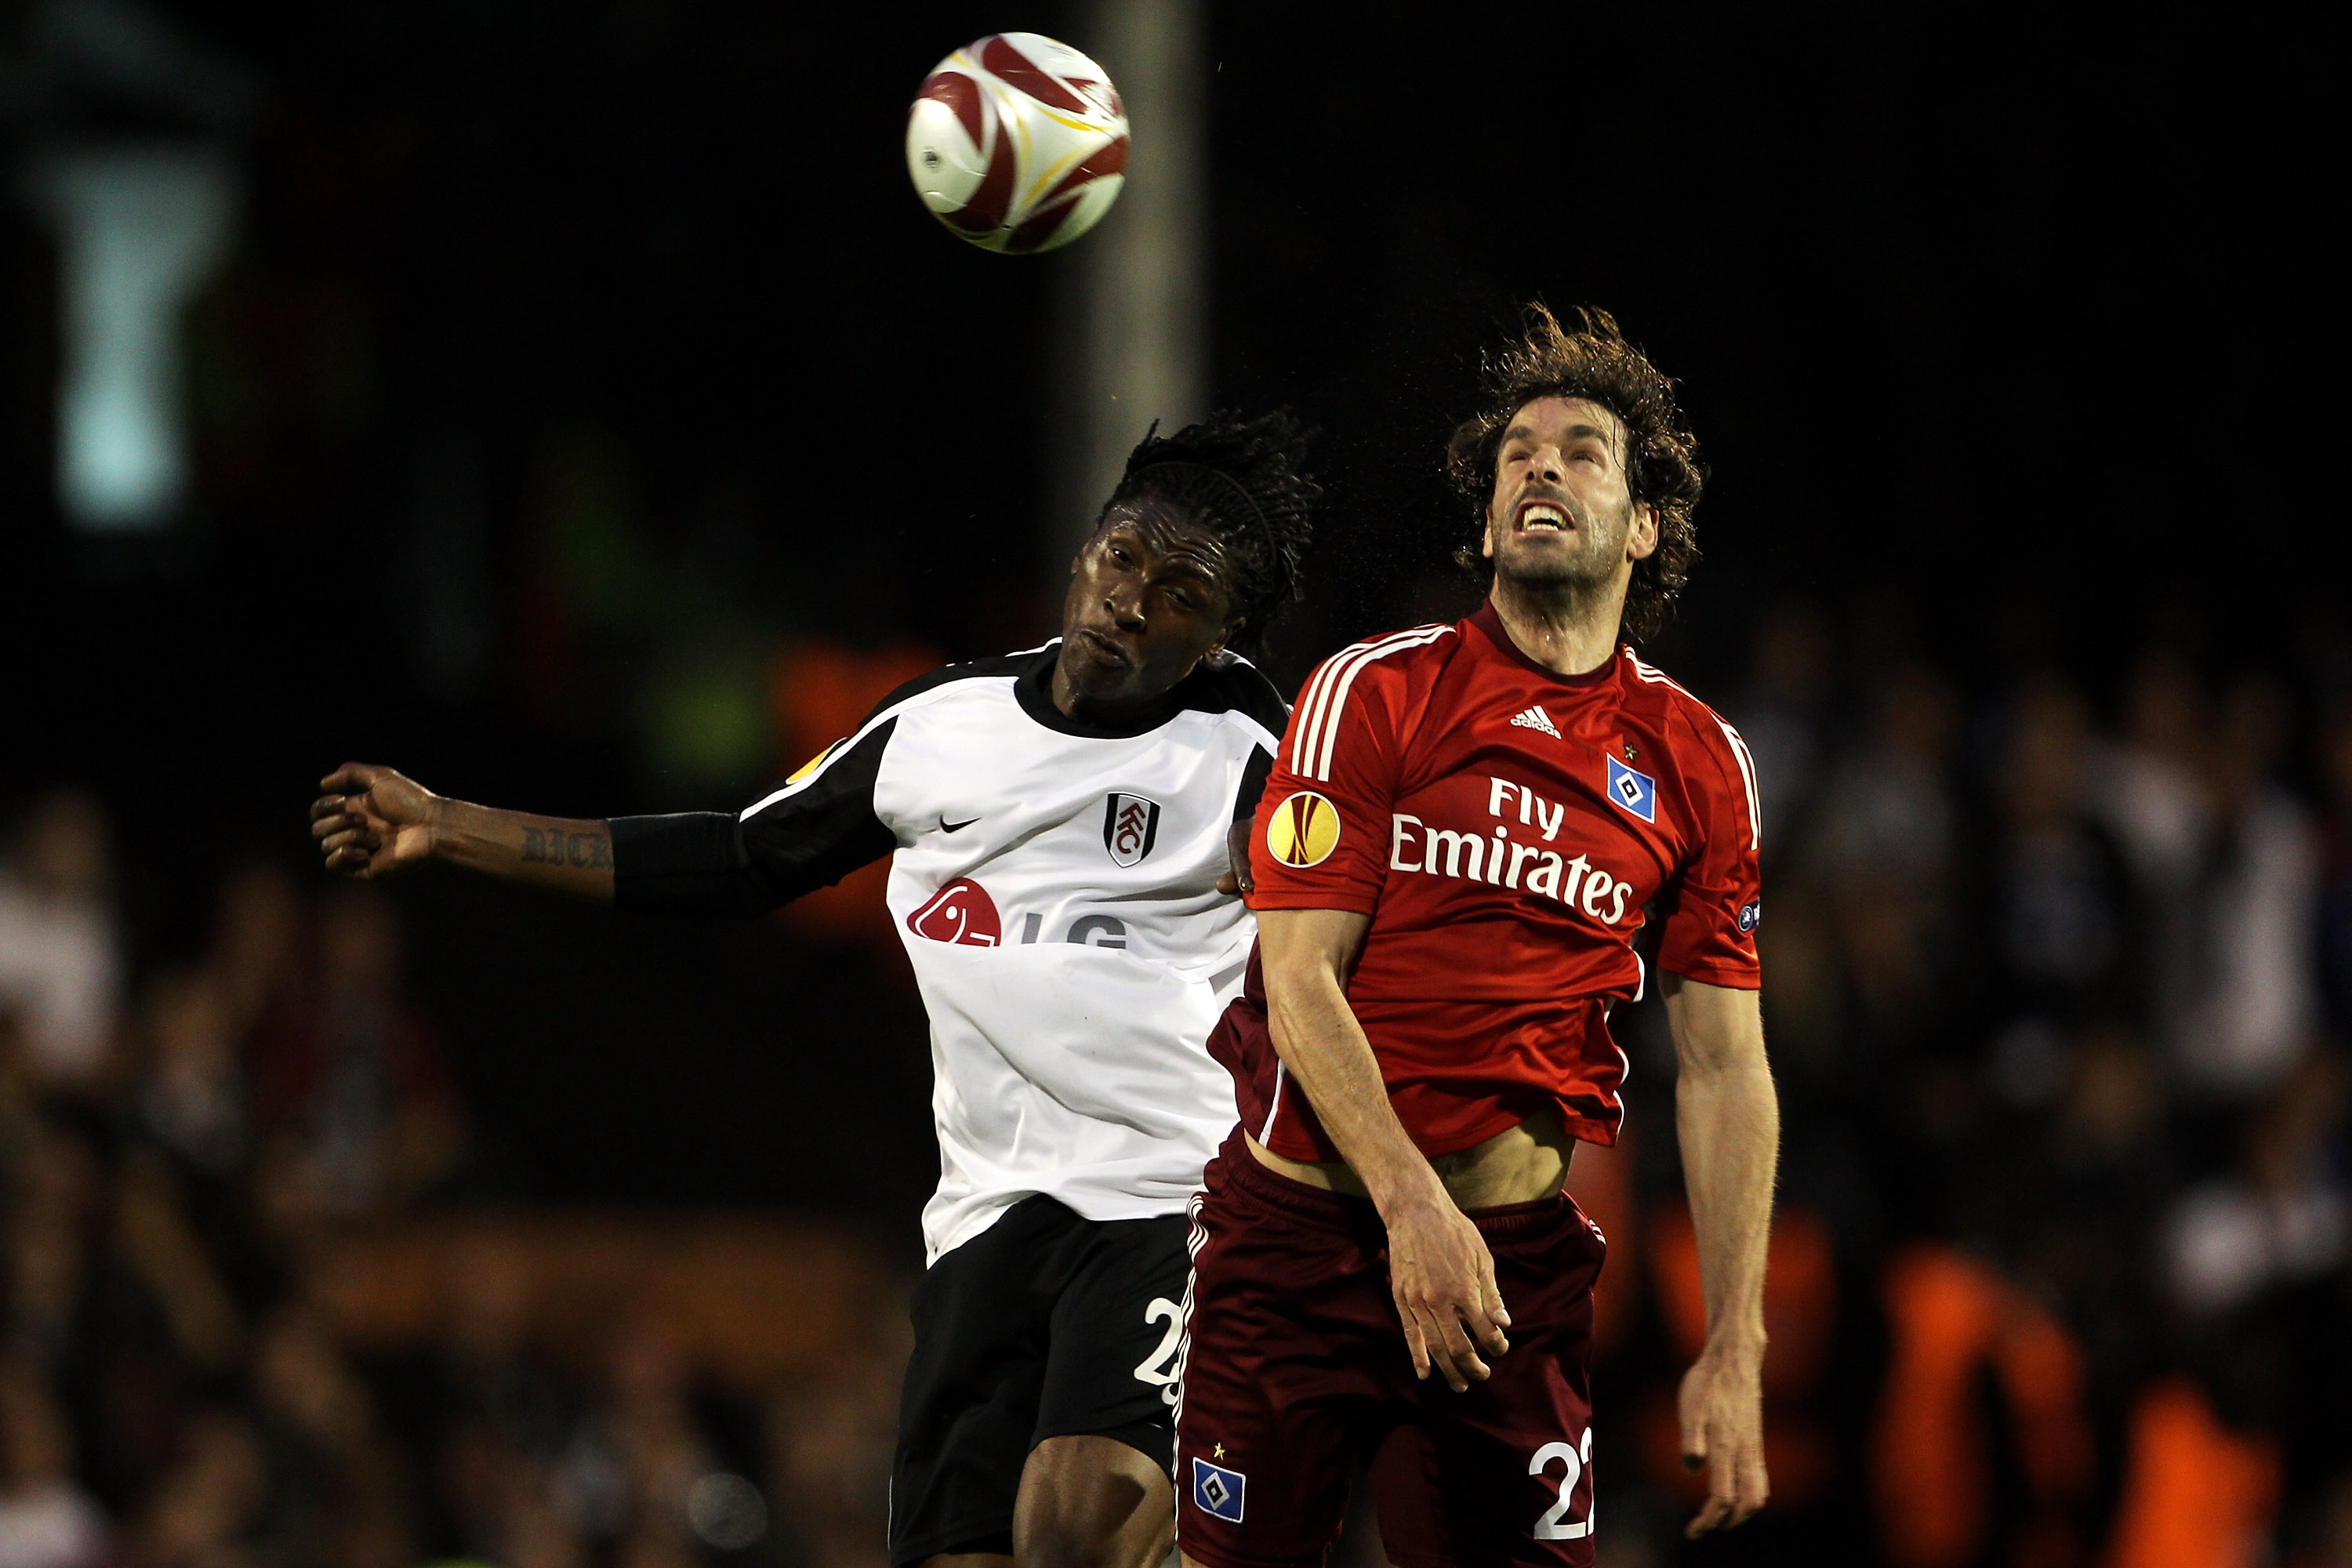 LONDON, ENGLAND - APRIL 29:  Dickson Etuhu of Fulham battles for the header with Ruud van Nistelrooy of Hamburg during the UEFA Europa League Semi-Final 2nd leg match between Fulham and Hamburger SV at Craven Cottage on April 29, 2010 in London, England. 